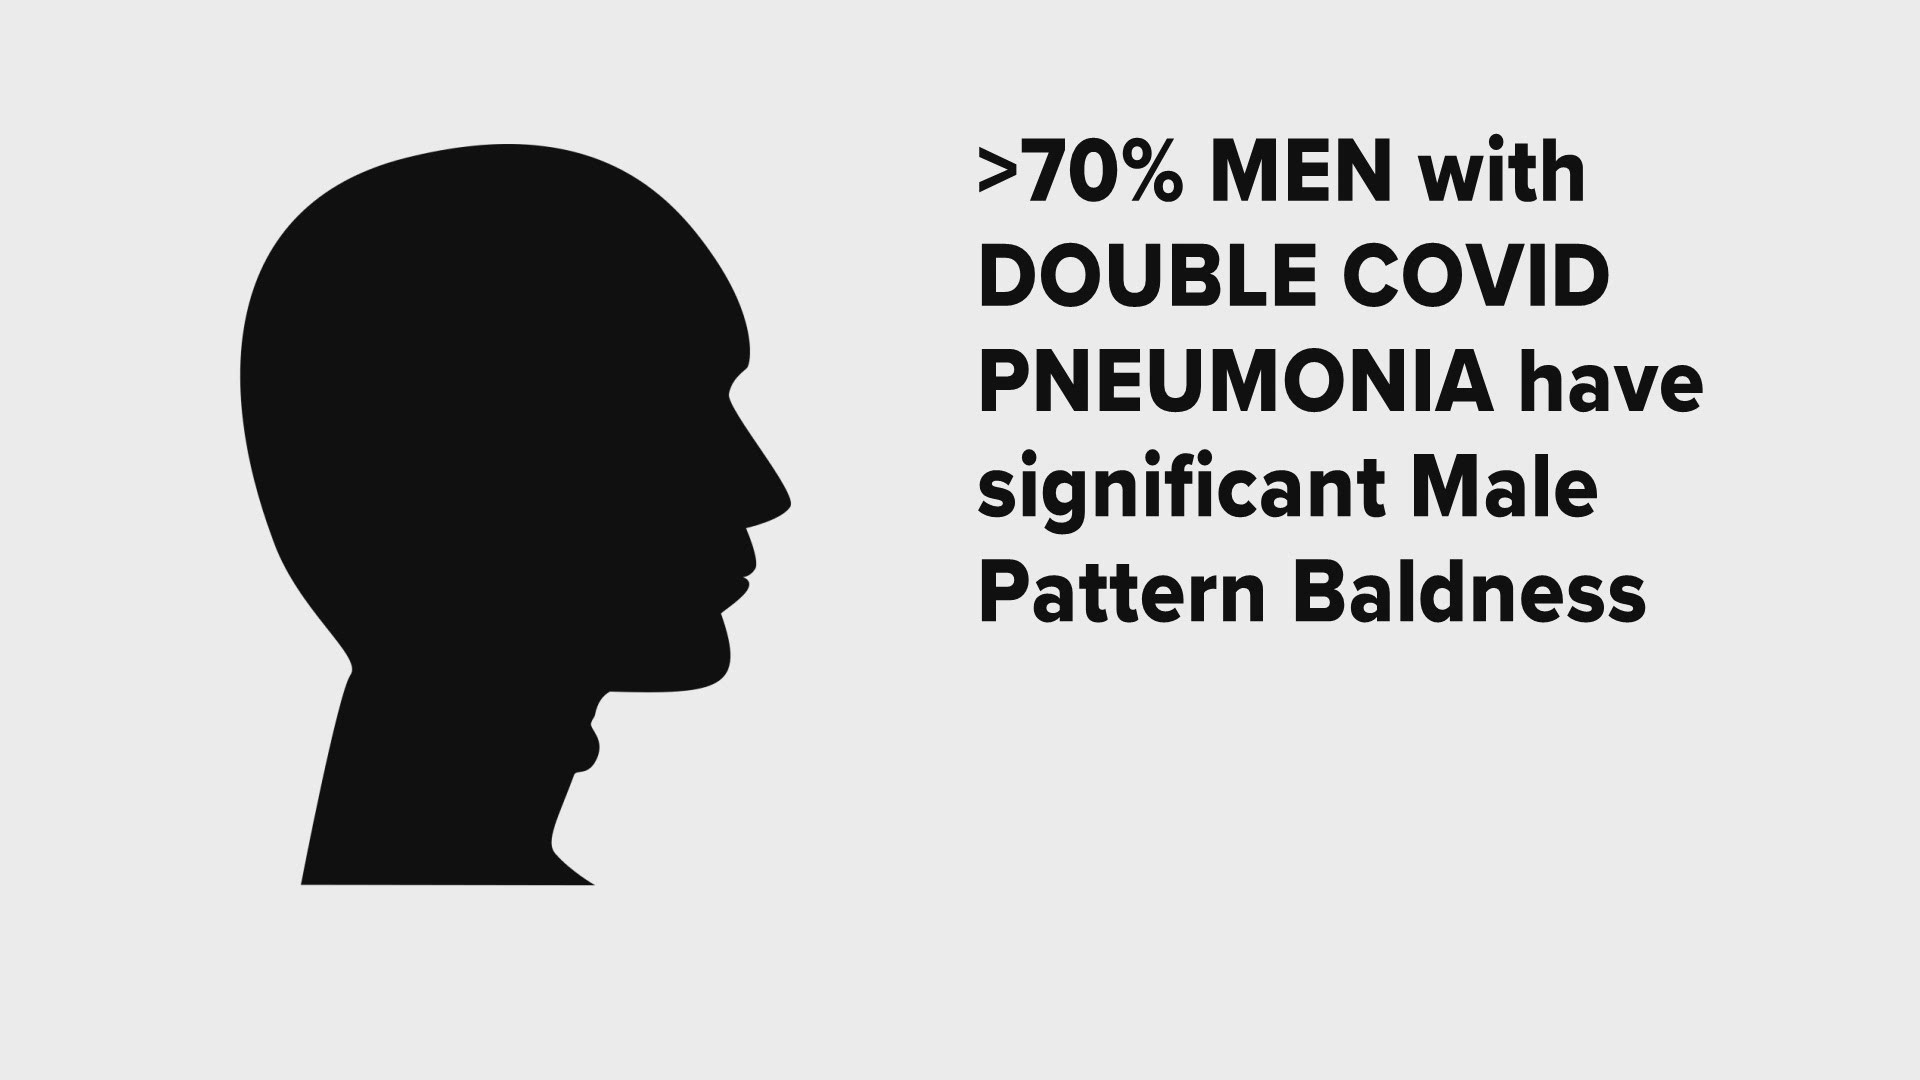 More than 70 percent of the men with double COVID pneumonia also had significant hair loss